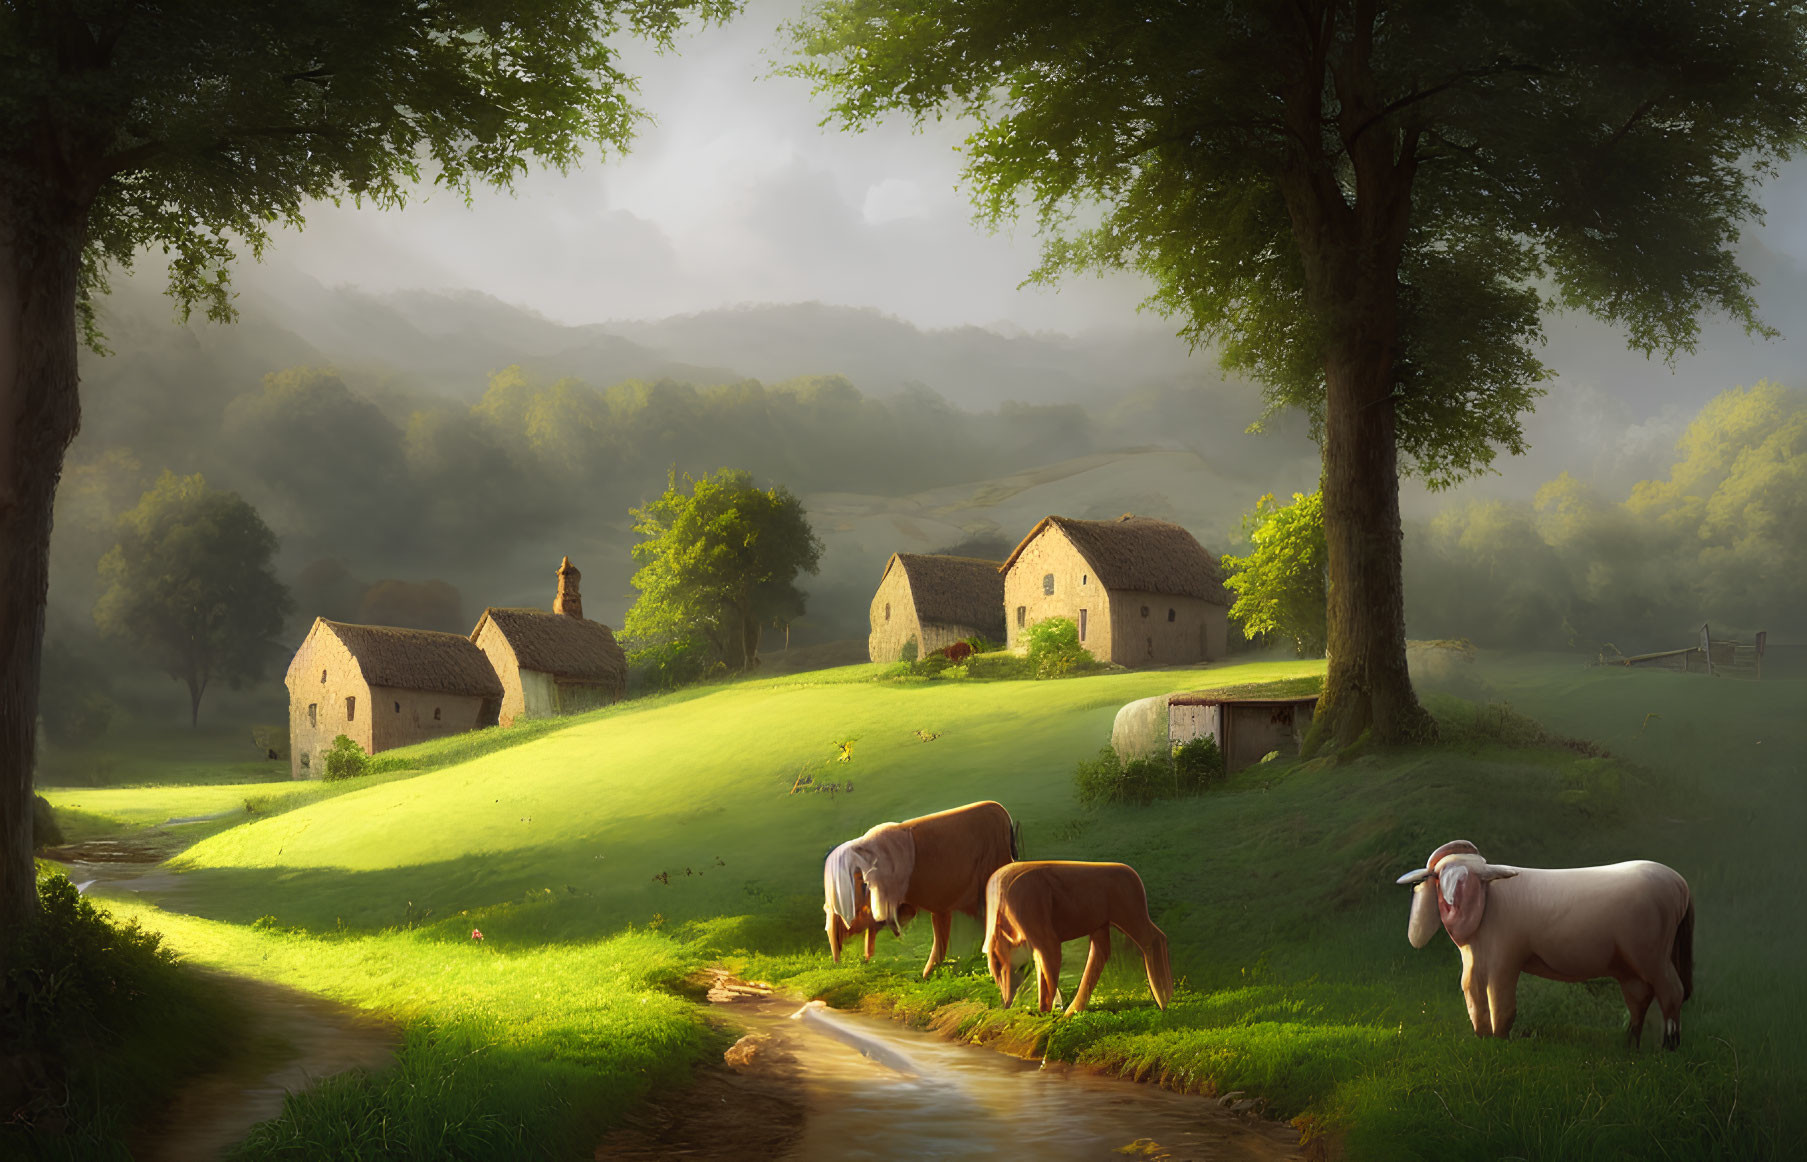 Tranquil rural sunrise scene with grazing cows, stone cottages, and rolling hills